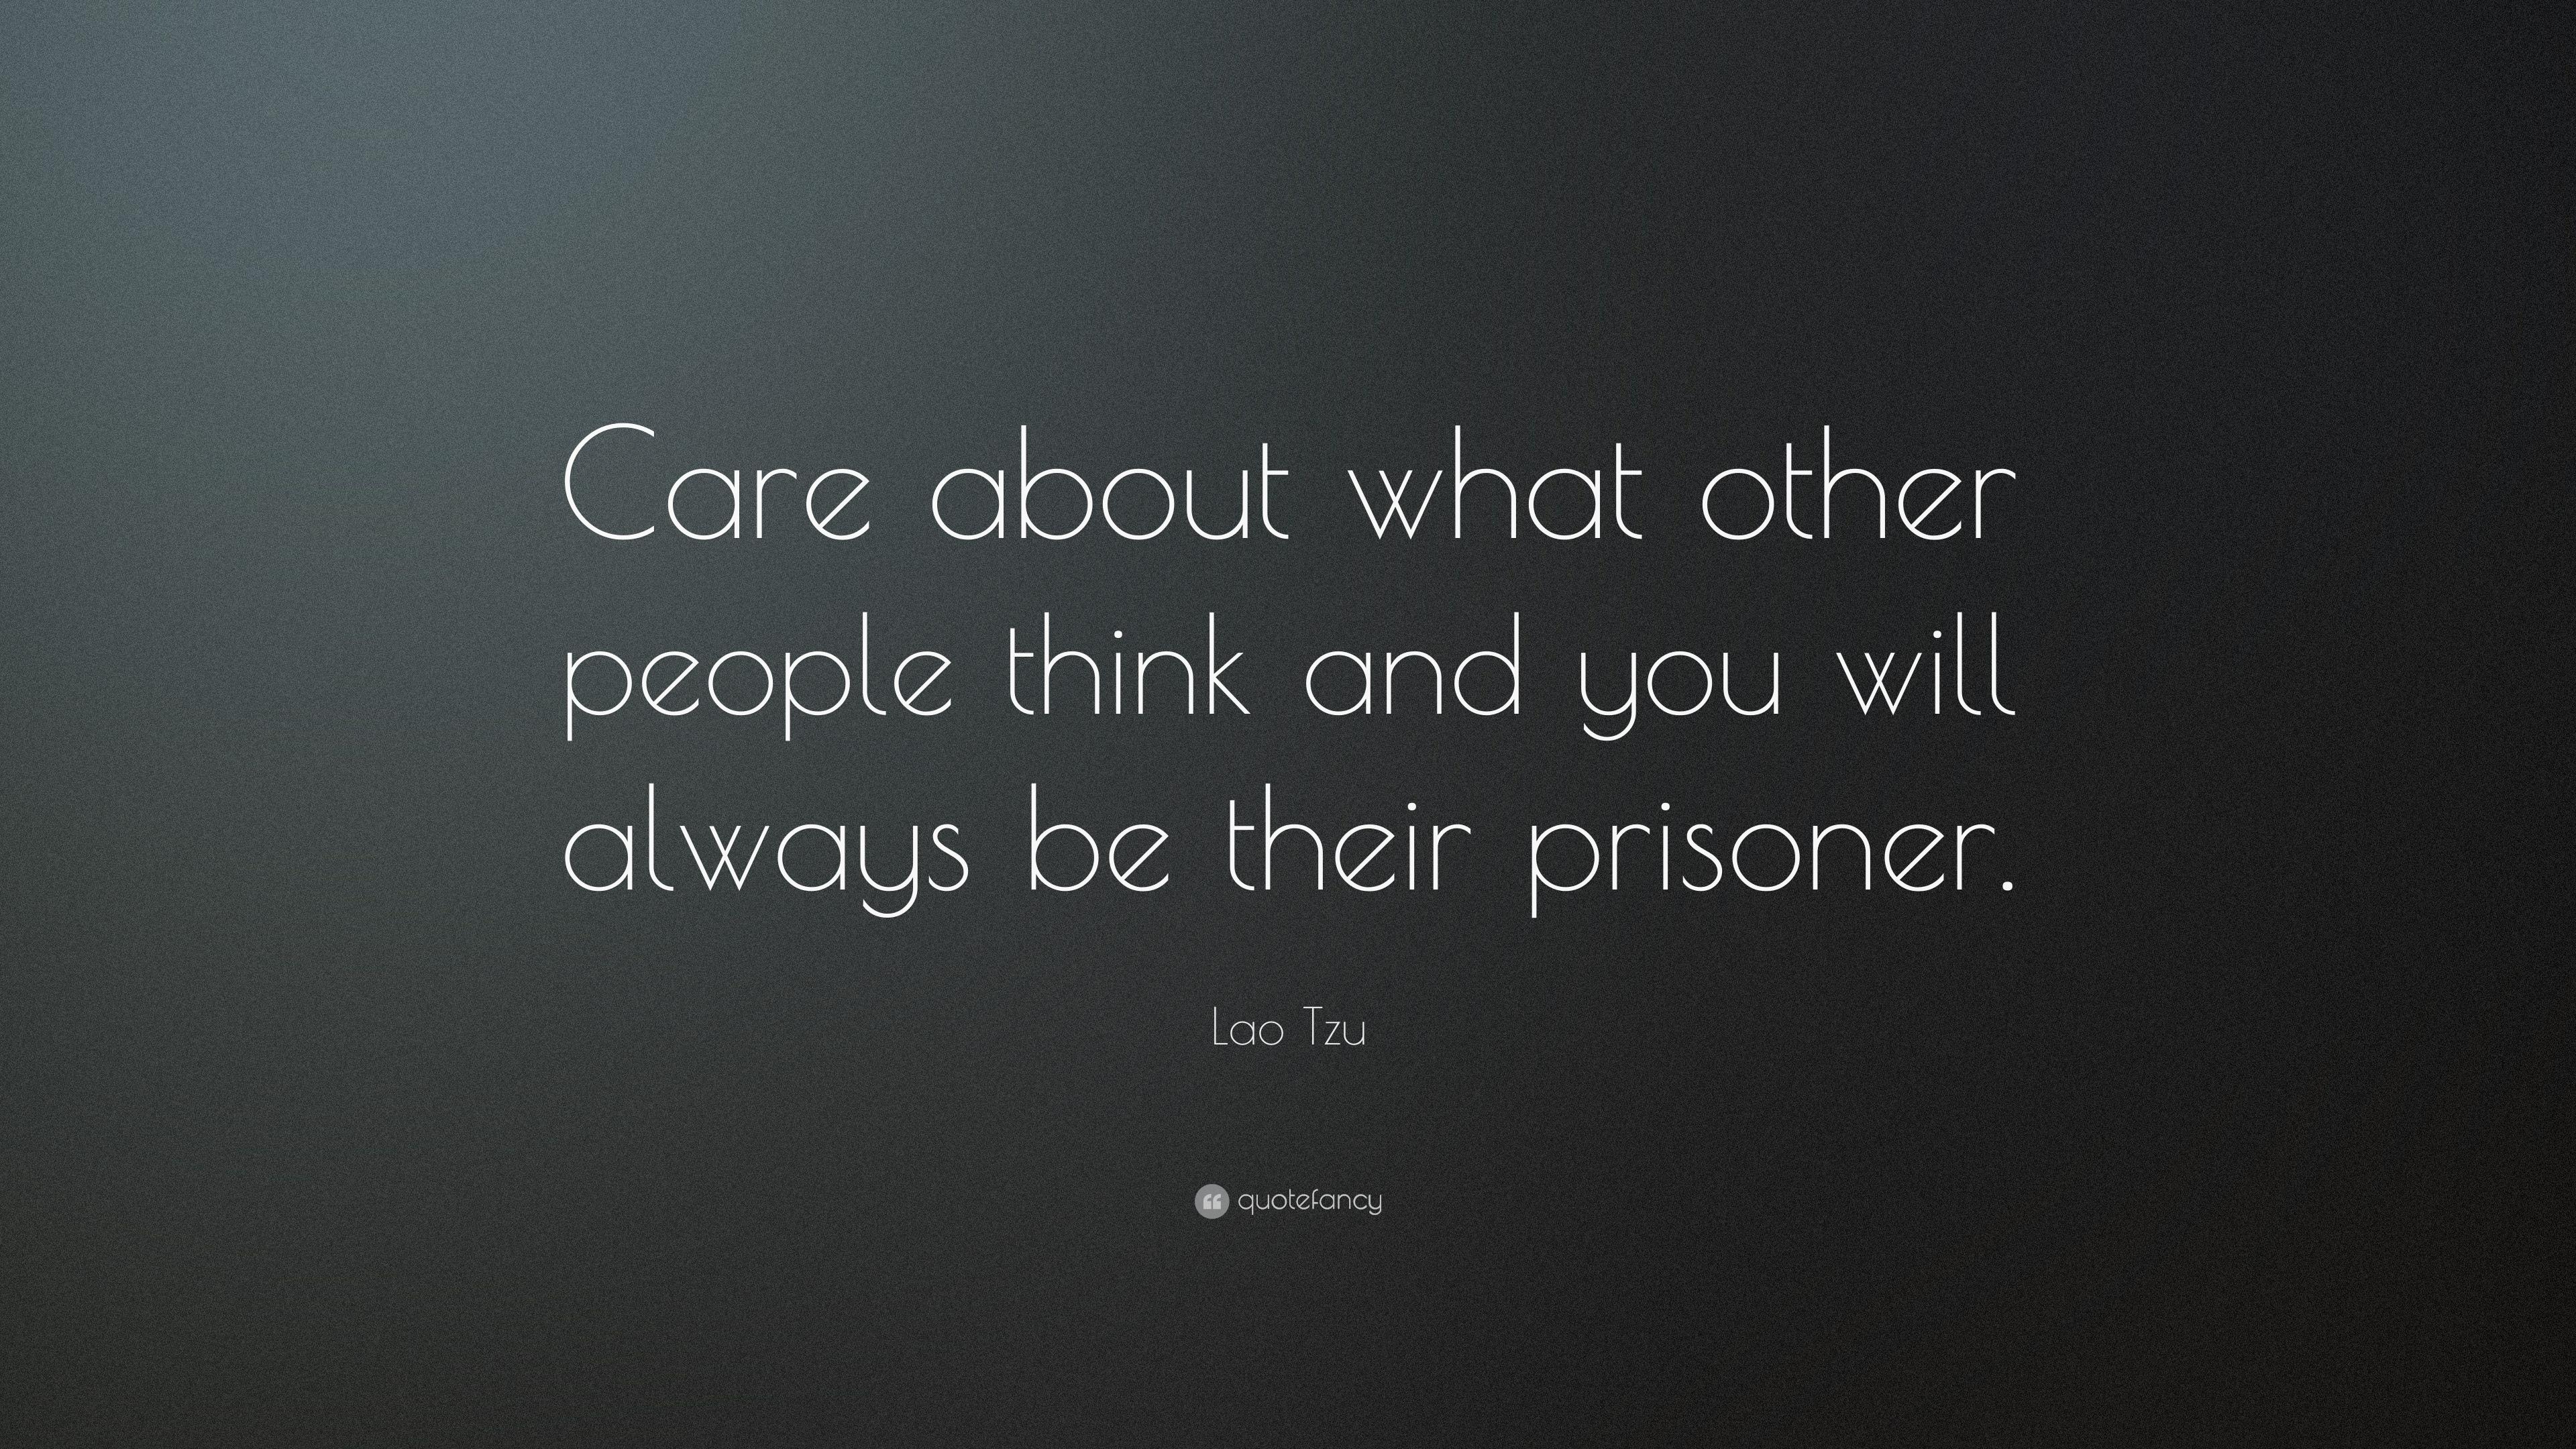 Lao Tzu Quote: “Care about what other people think and you will